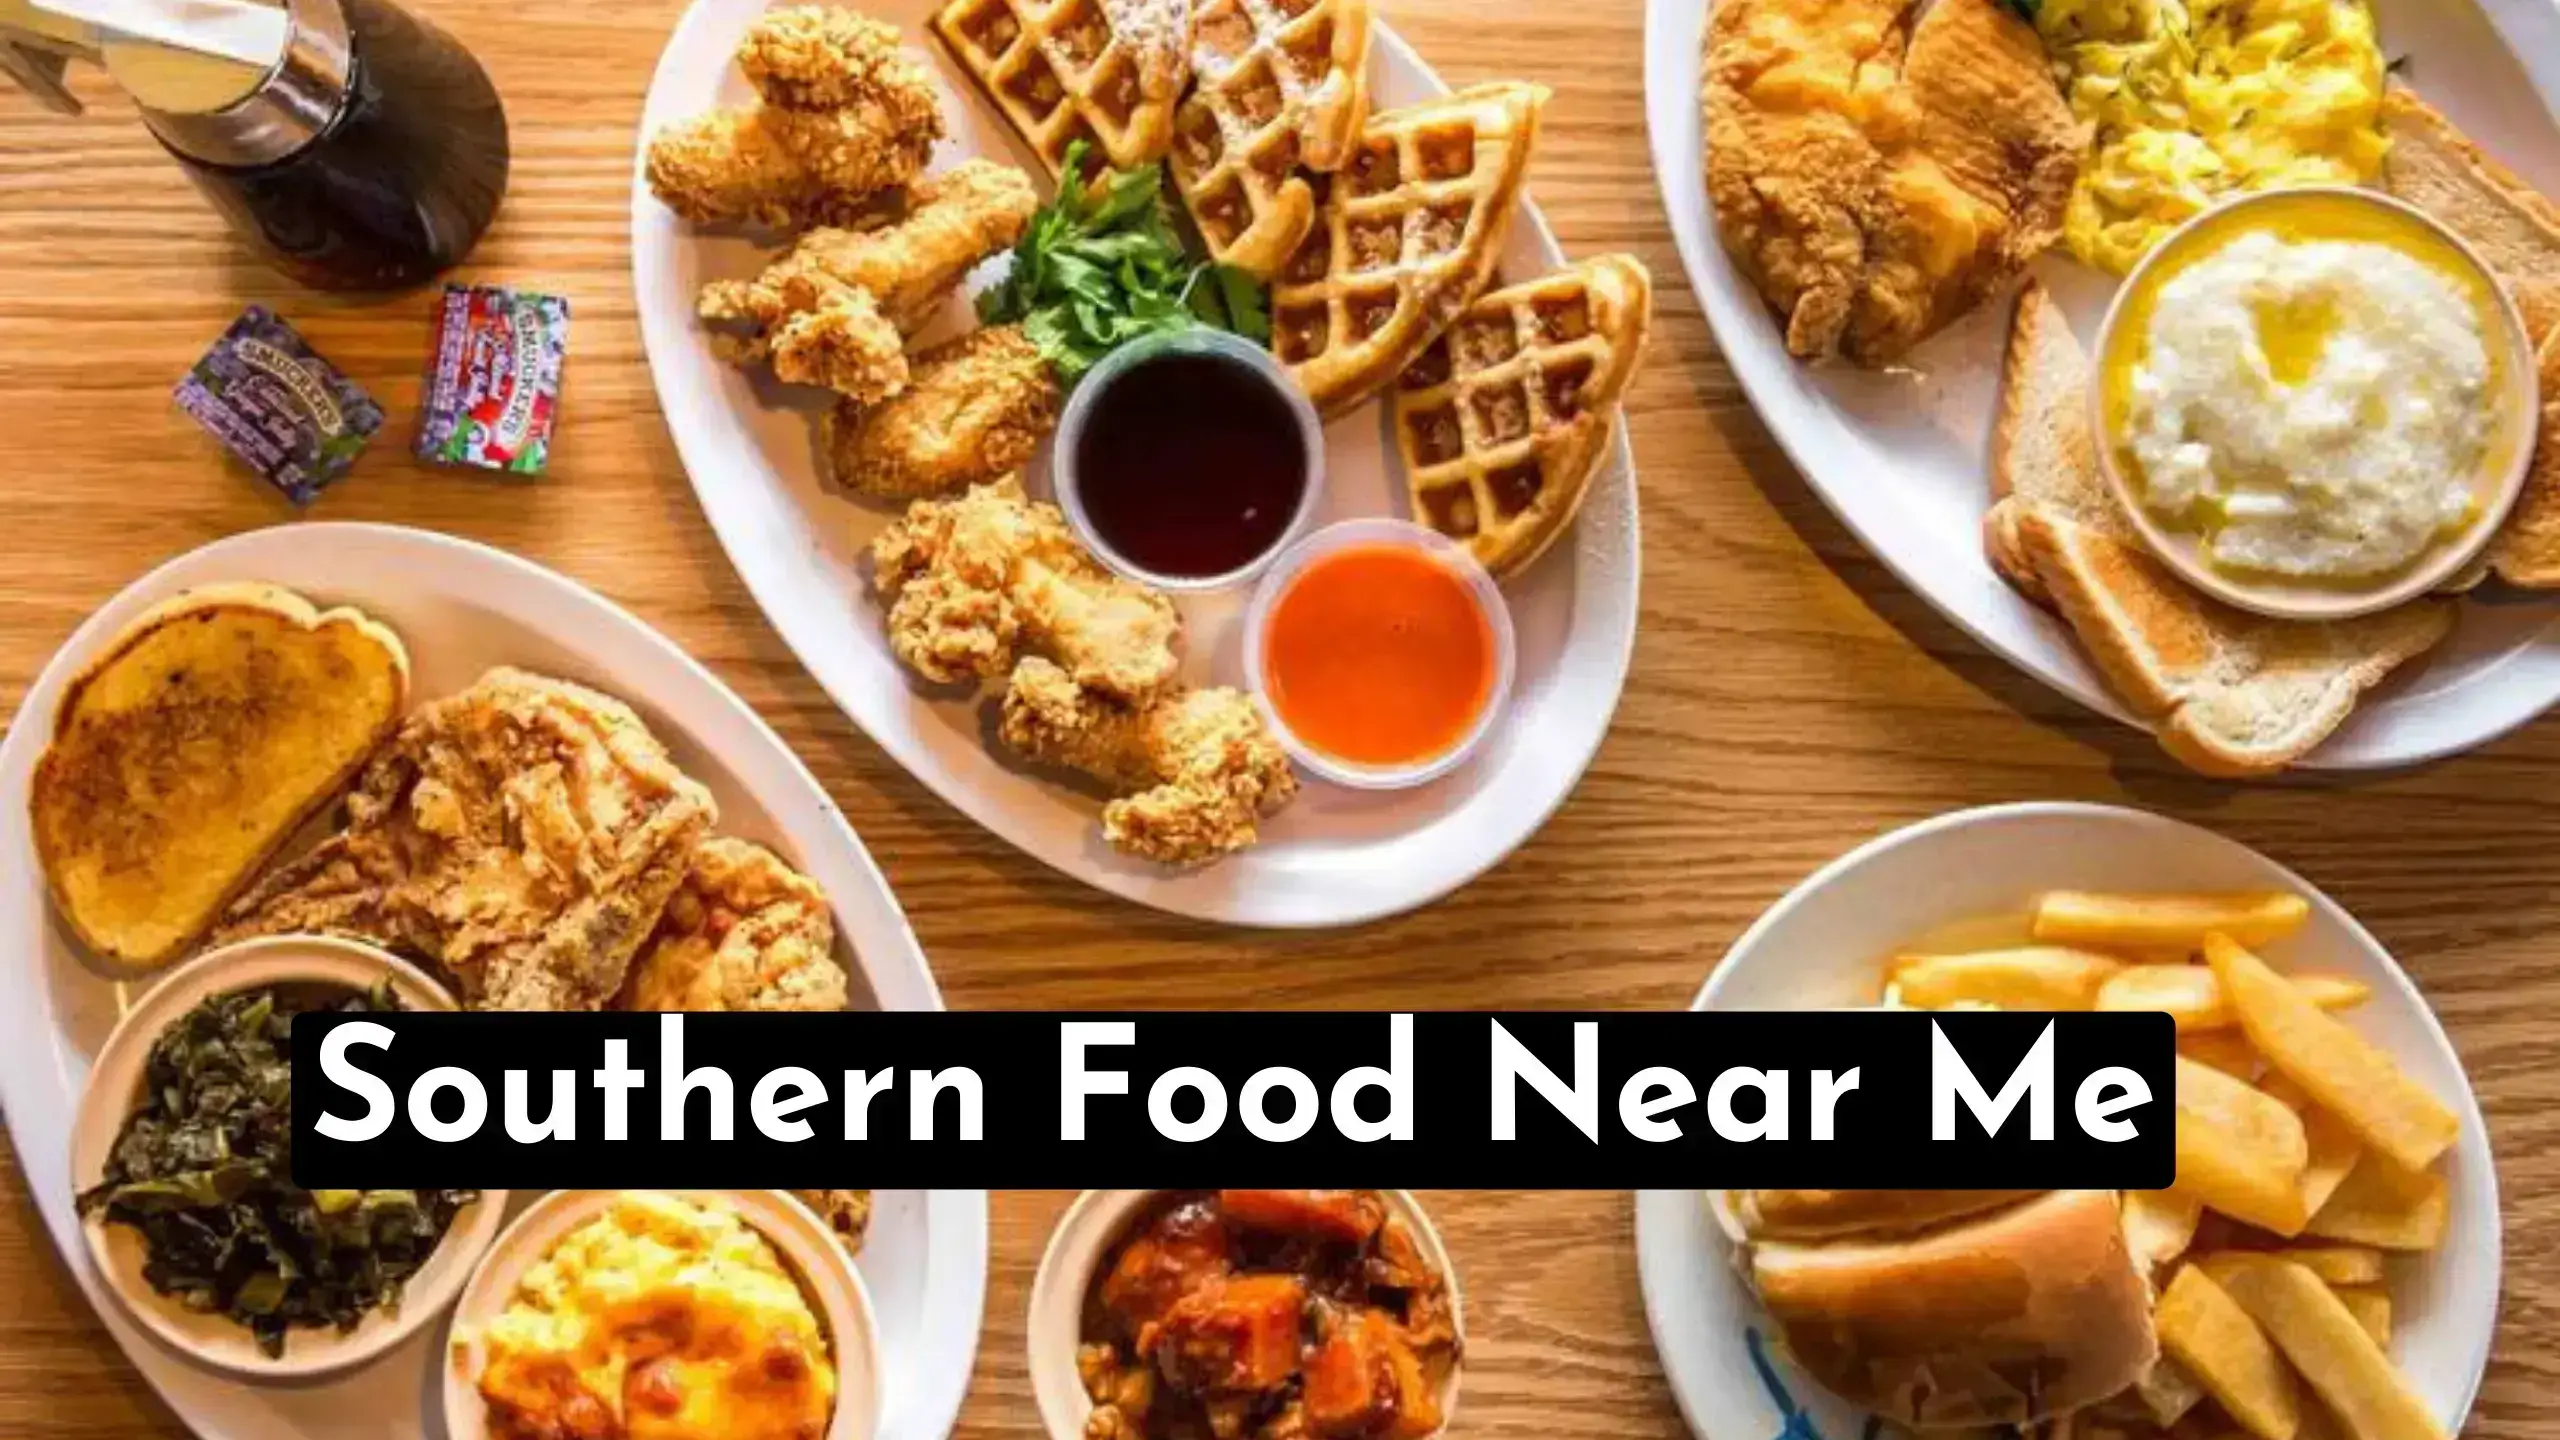 Southern Food Near Me – Comfort Food At Its Best